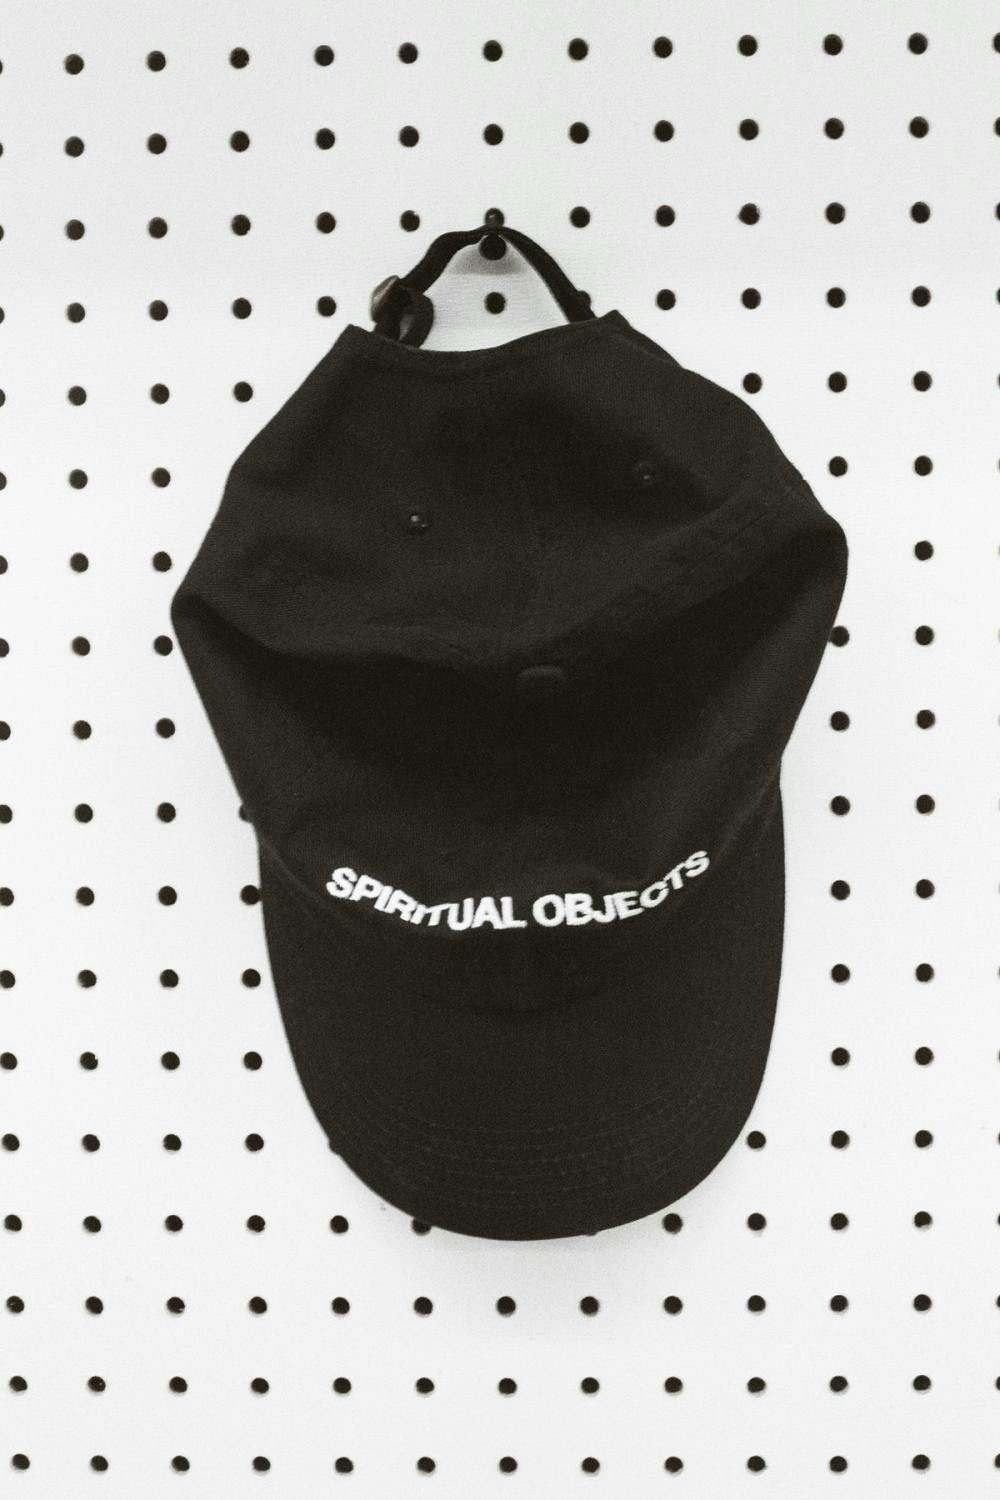 Main product image for Spiritual Objects Studio Hat